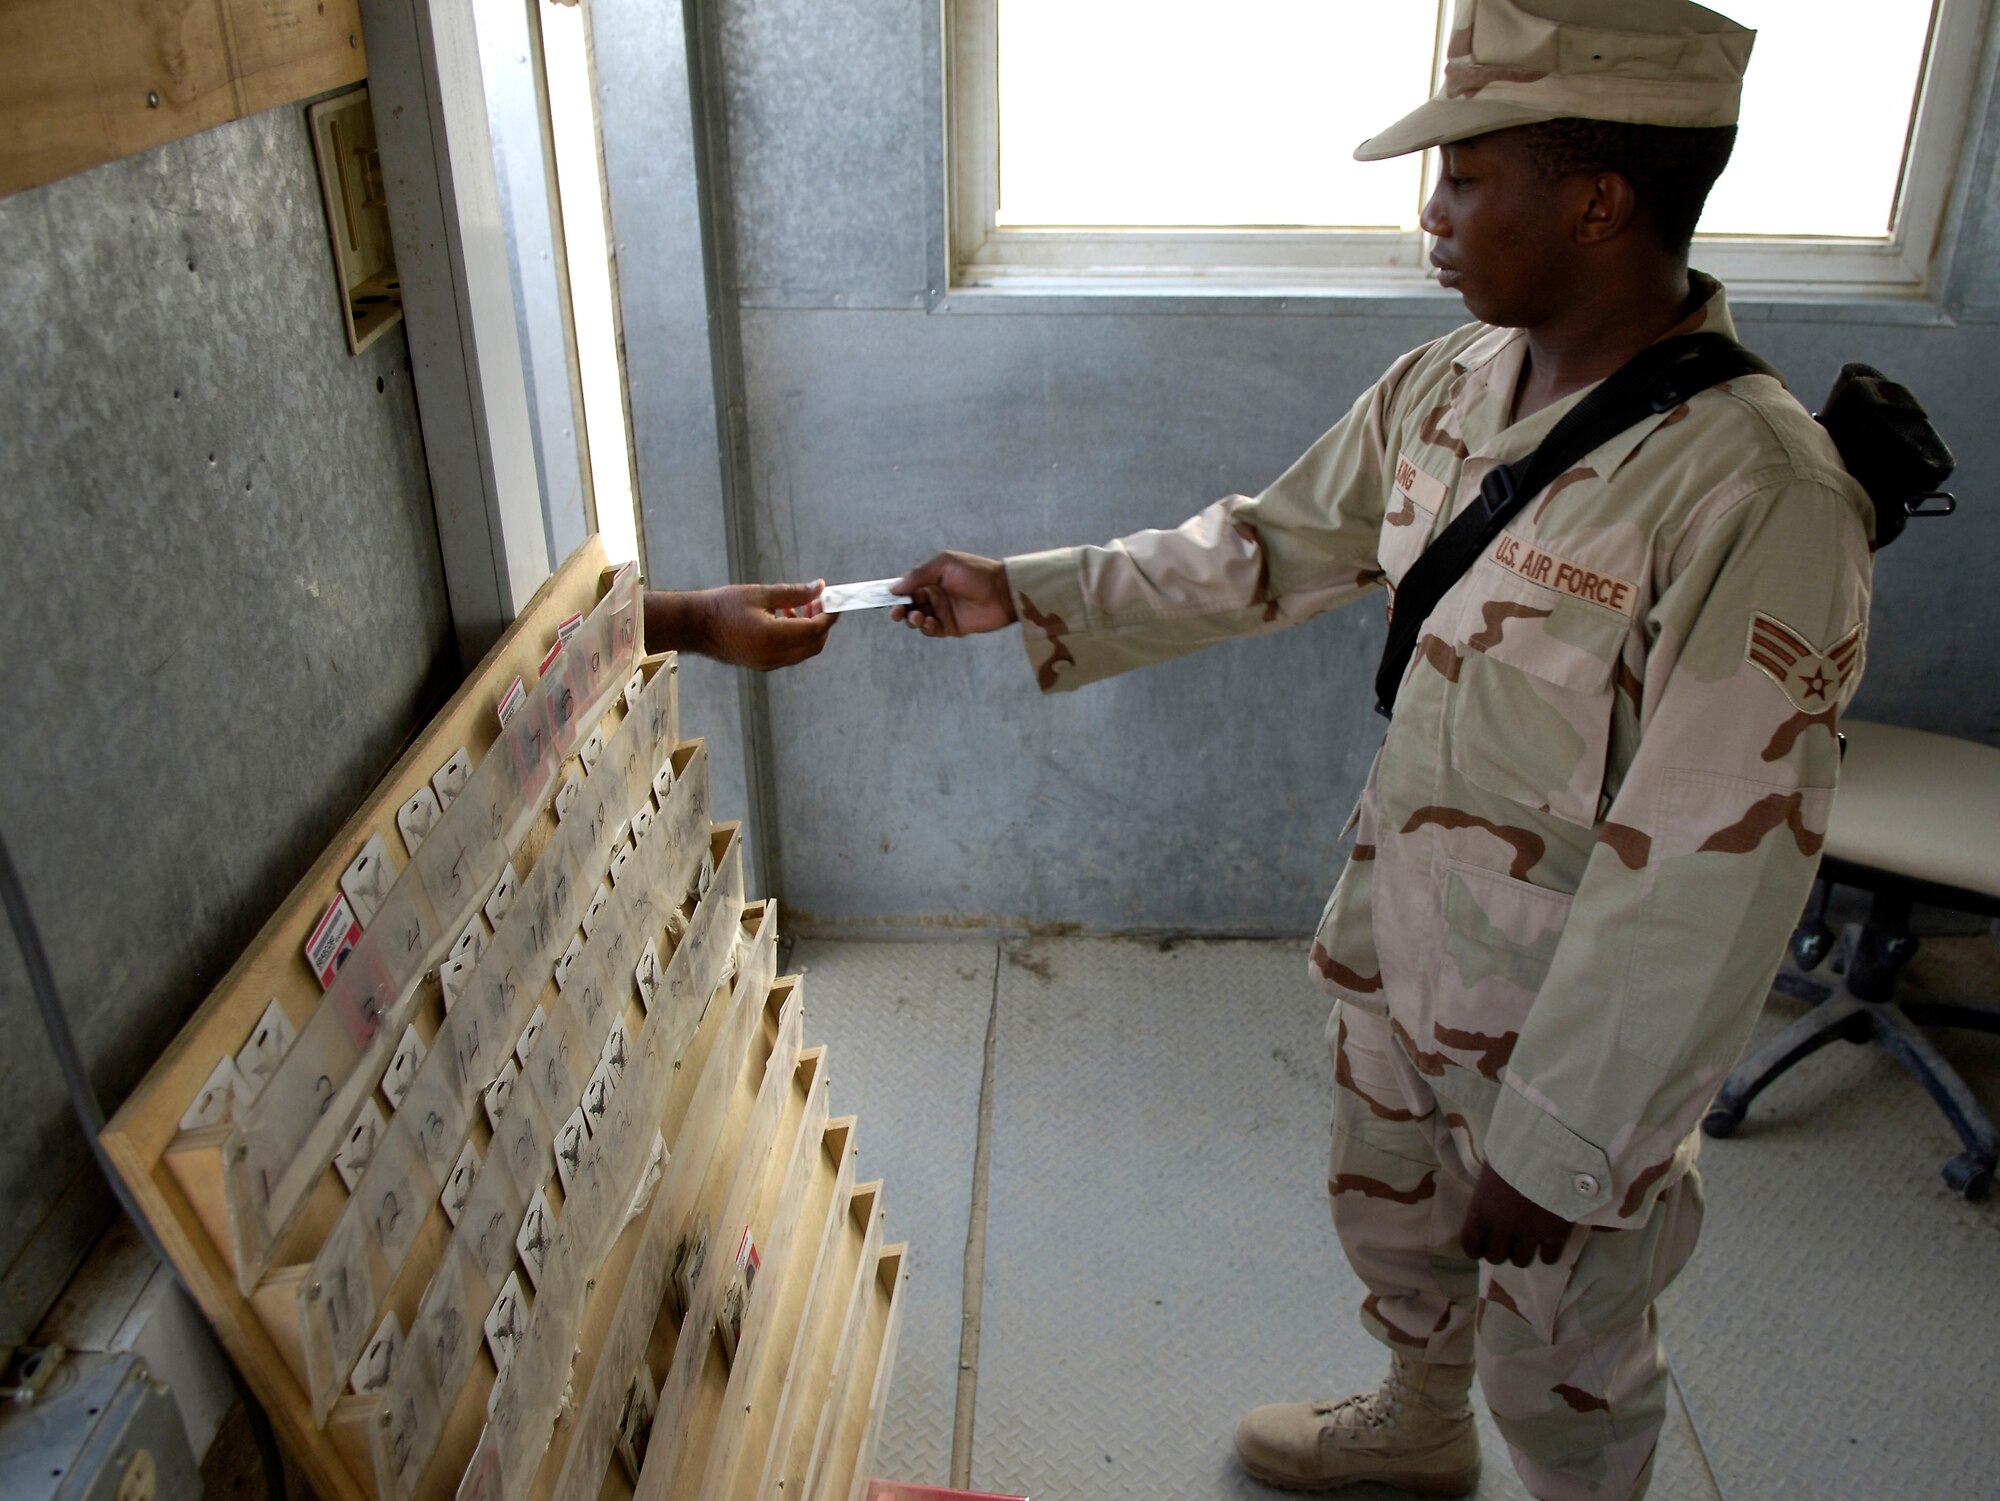 Senior Airman Raymond King takes a badge from a local national working on Bagram Air Base, Afghanistan, Aug 24, 2006.  The workers are employed by a contractor on the base and are escorted by Airmen while on the job.  The badges ensure each worker is accounted for.  Airman King is a force protection escort deployed from Dover Air Force Base, Del. (U.S. Air Force photo/Senior Airman Brian Ferguson)
